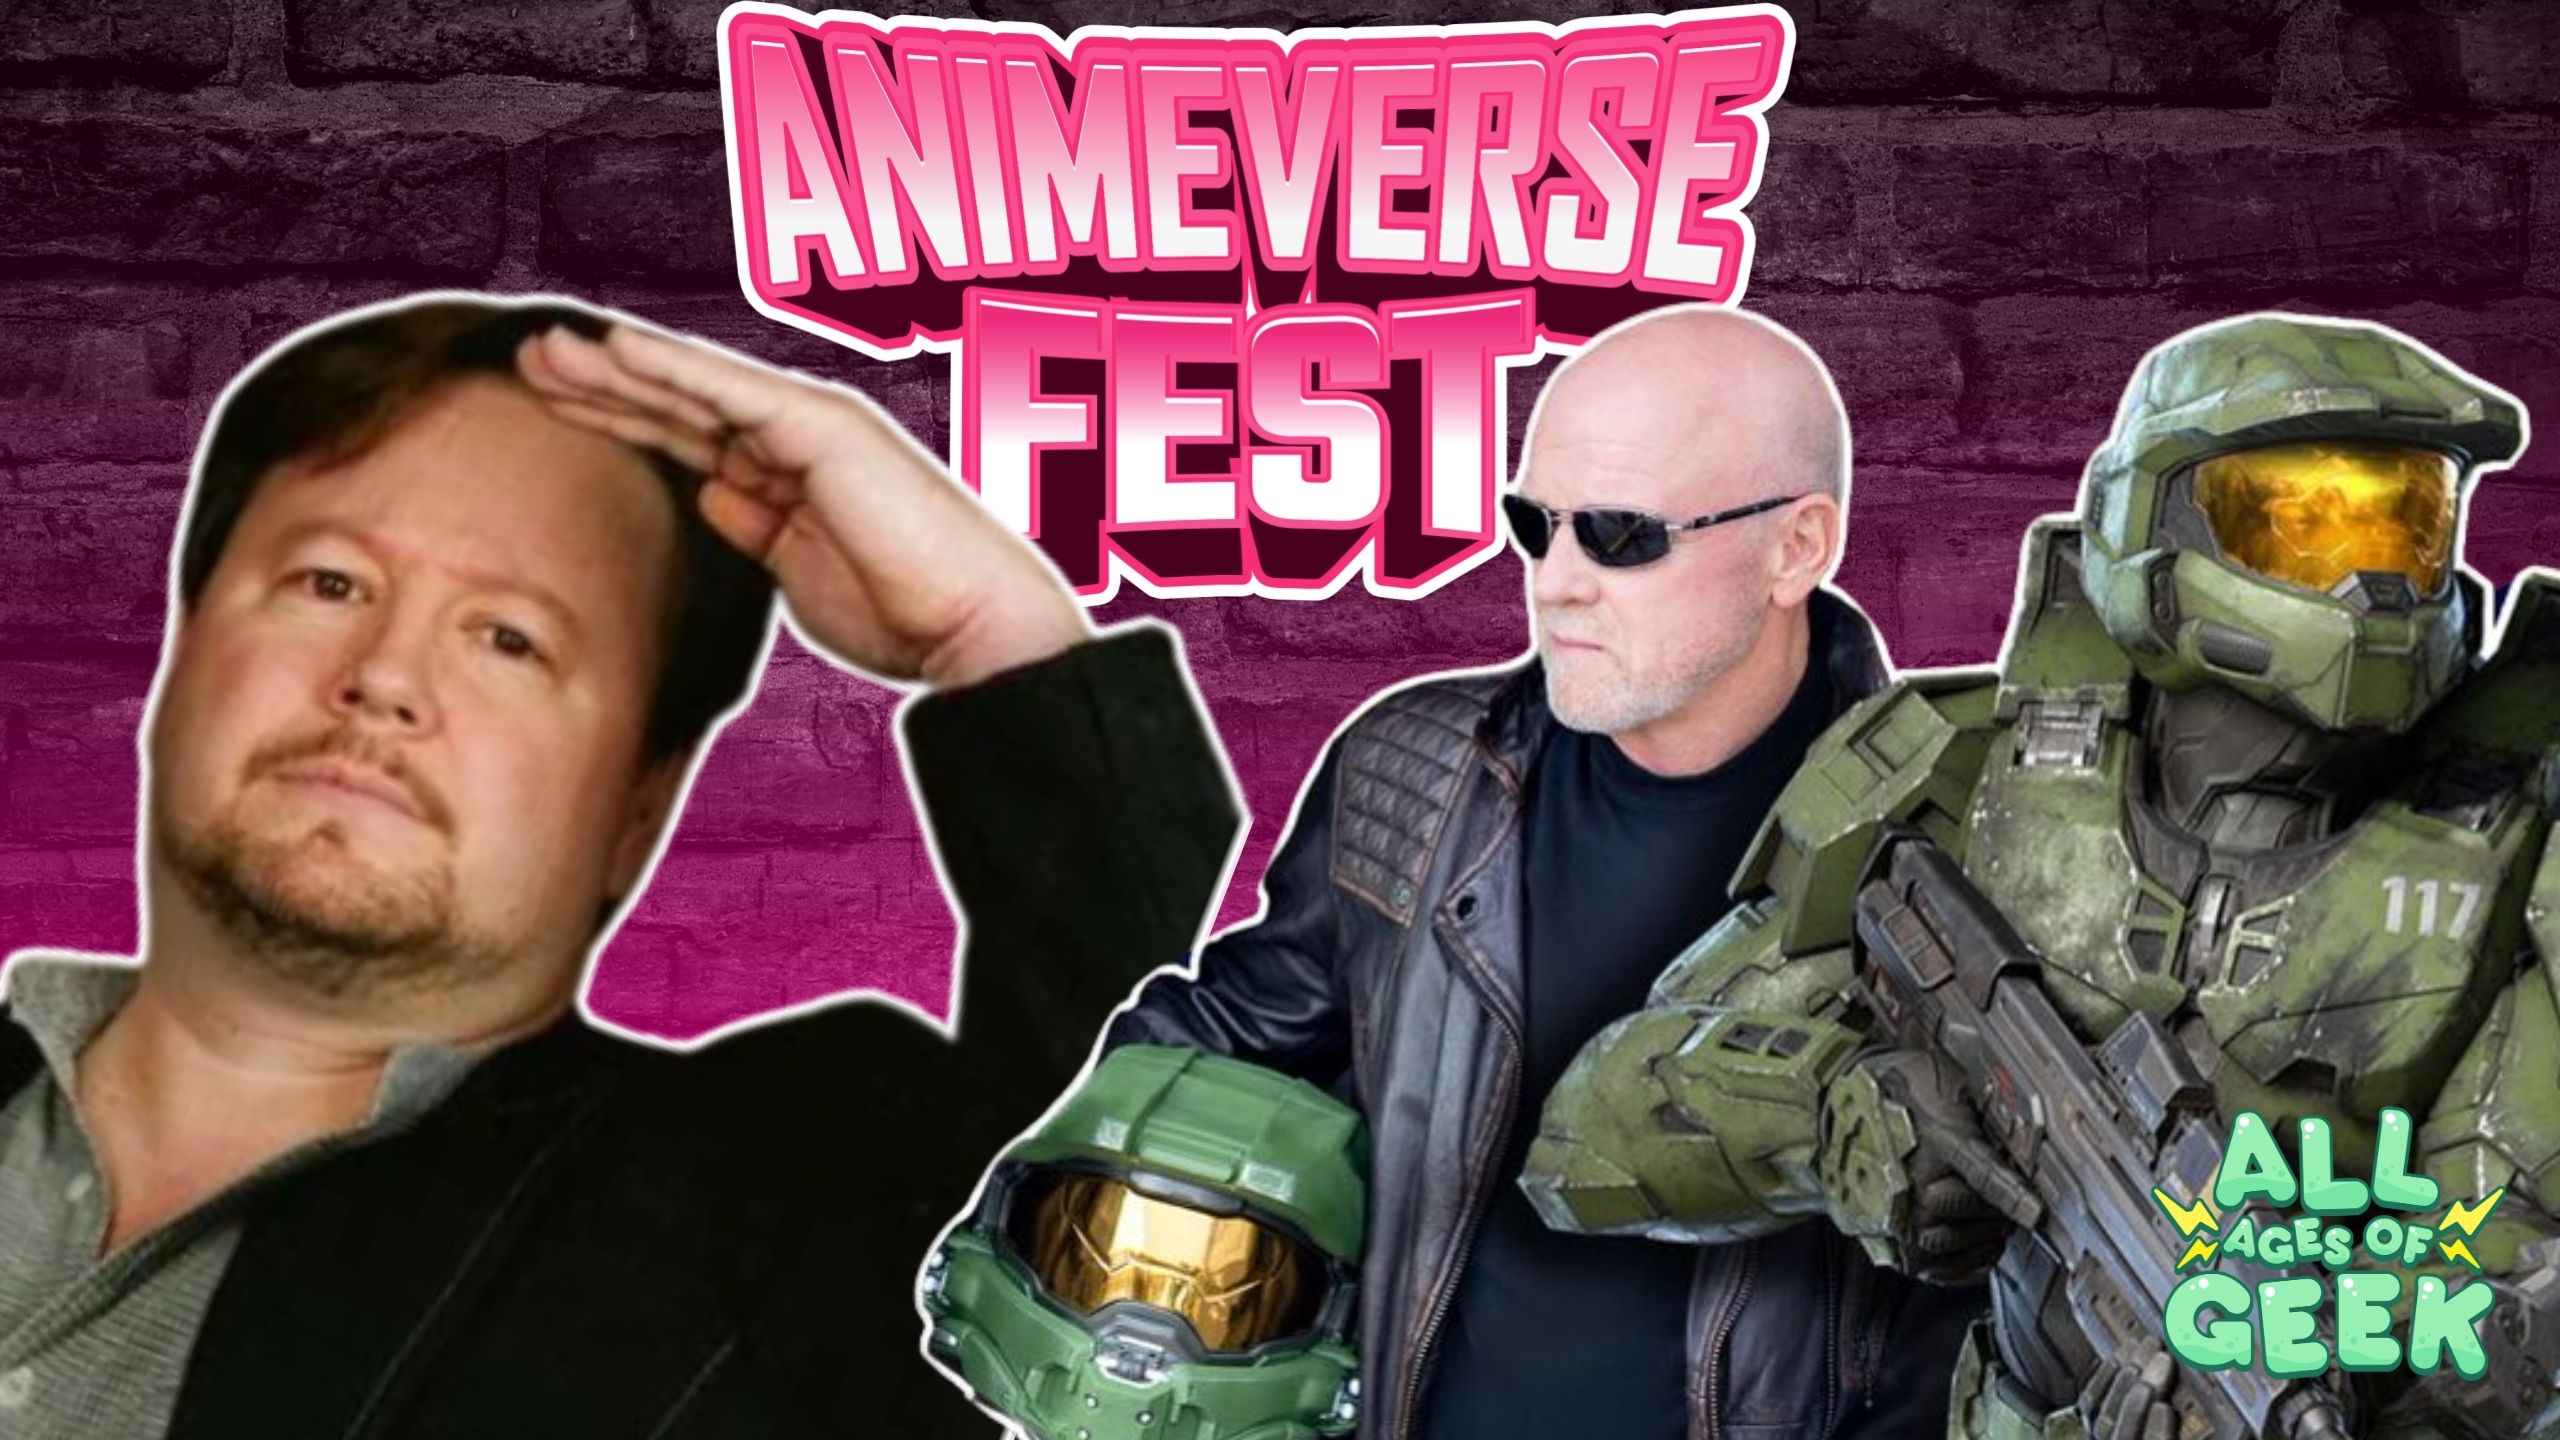 Promotional image for Animeverse Fest. It features two notable guests, Sonny Strait on the left and Steve Downes on the right, along with Master Chief from the "Halo" series. The Animeverse Fest logo is prominently displayed at the top center. The All Ages of Geek logo is at the bottom right corner. The background is a dark, textured wall with a gradient effect transitioning from dark purple at the top to a lighter shade towards the bottom.